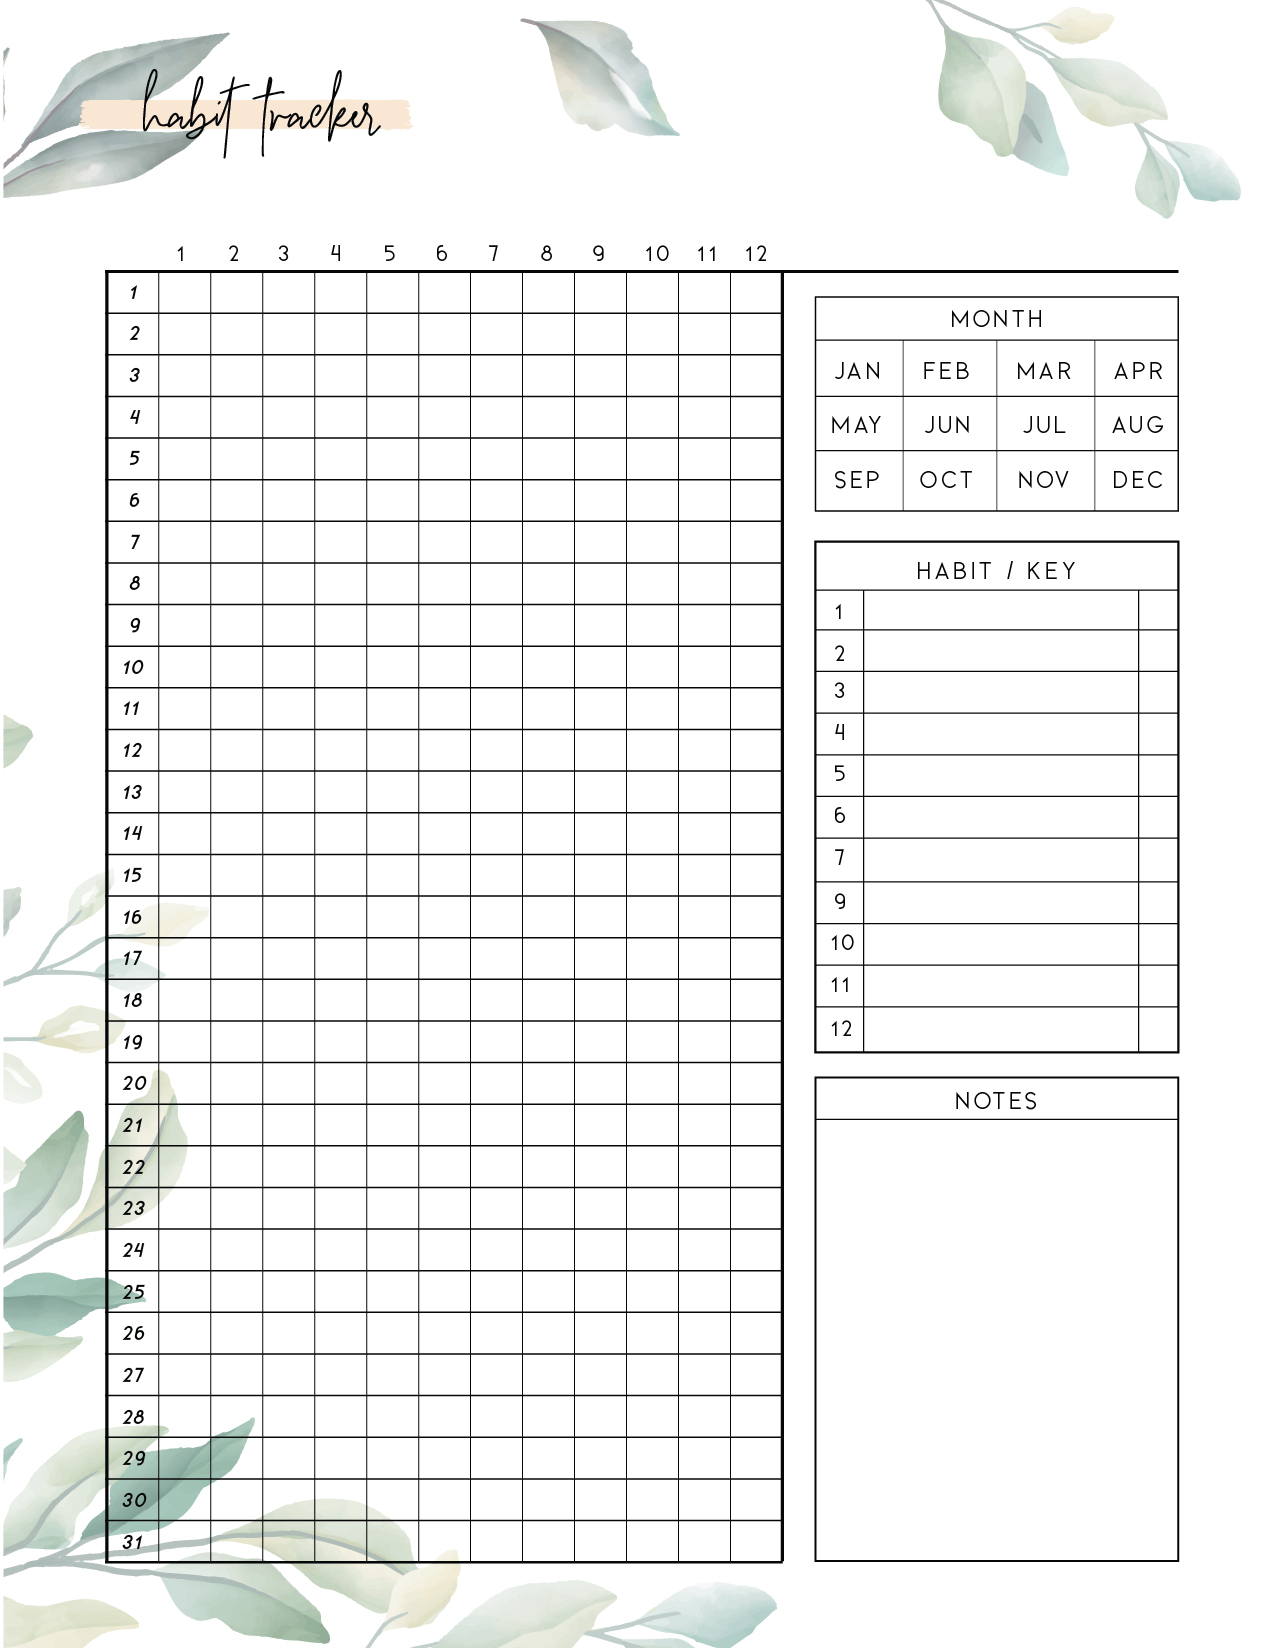 Goal Planner Routine Tracker Weight Loss Tracker Printable Weekly Habit 